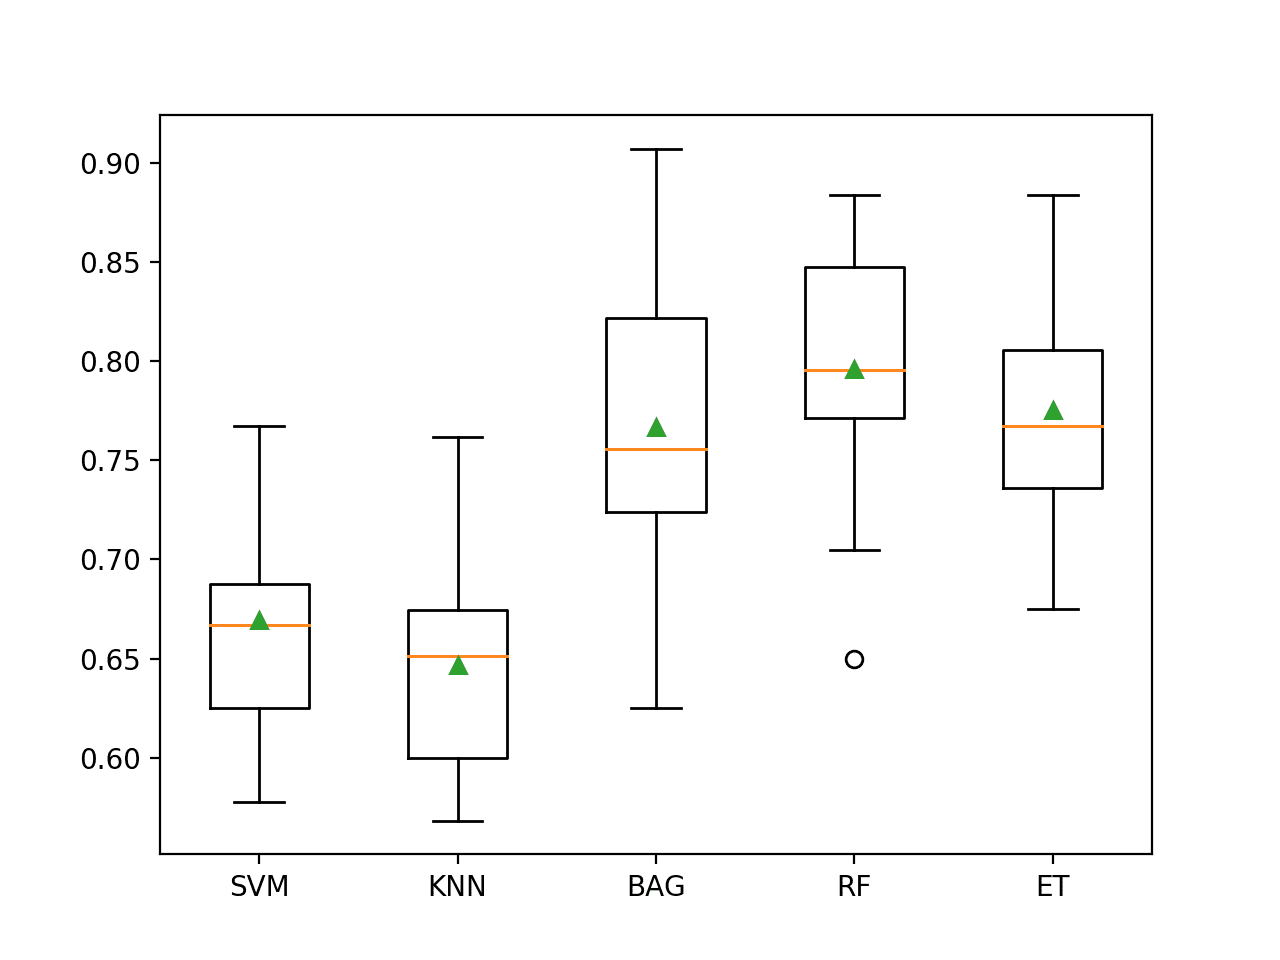 Box and Whisker Plot of Machine Learning Models on the Imbalanced Glass Identification Dataset